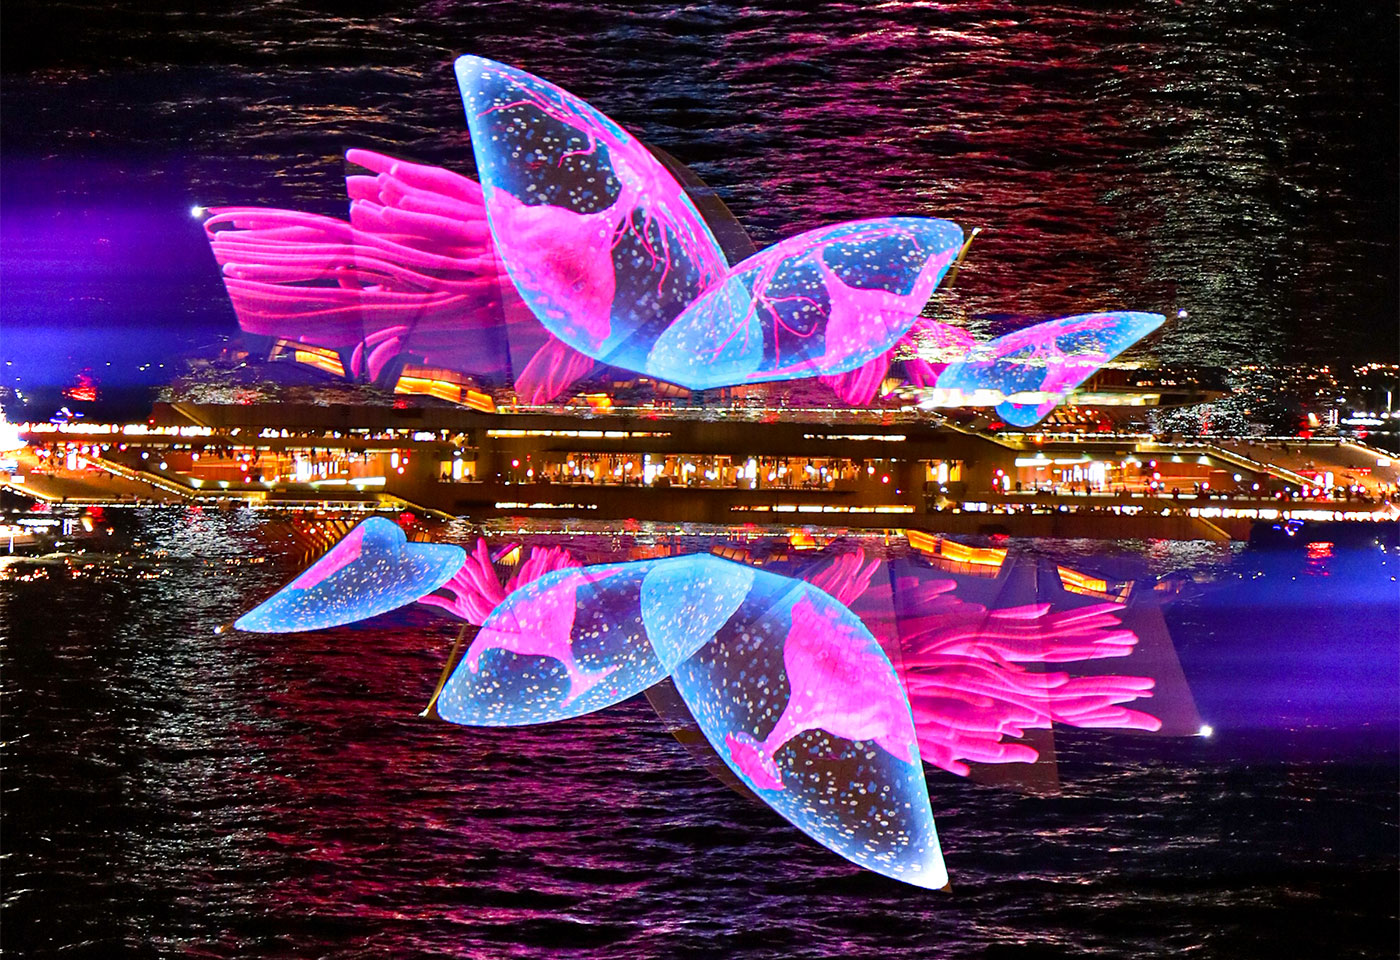 10 photography tips and best locations to capture Vivid Sydney by Elisa Eves